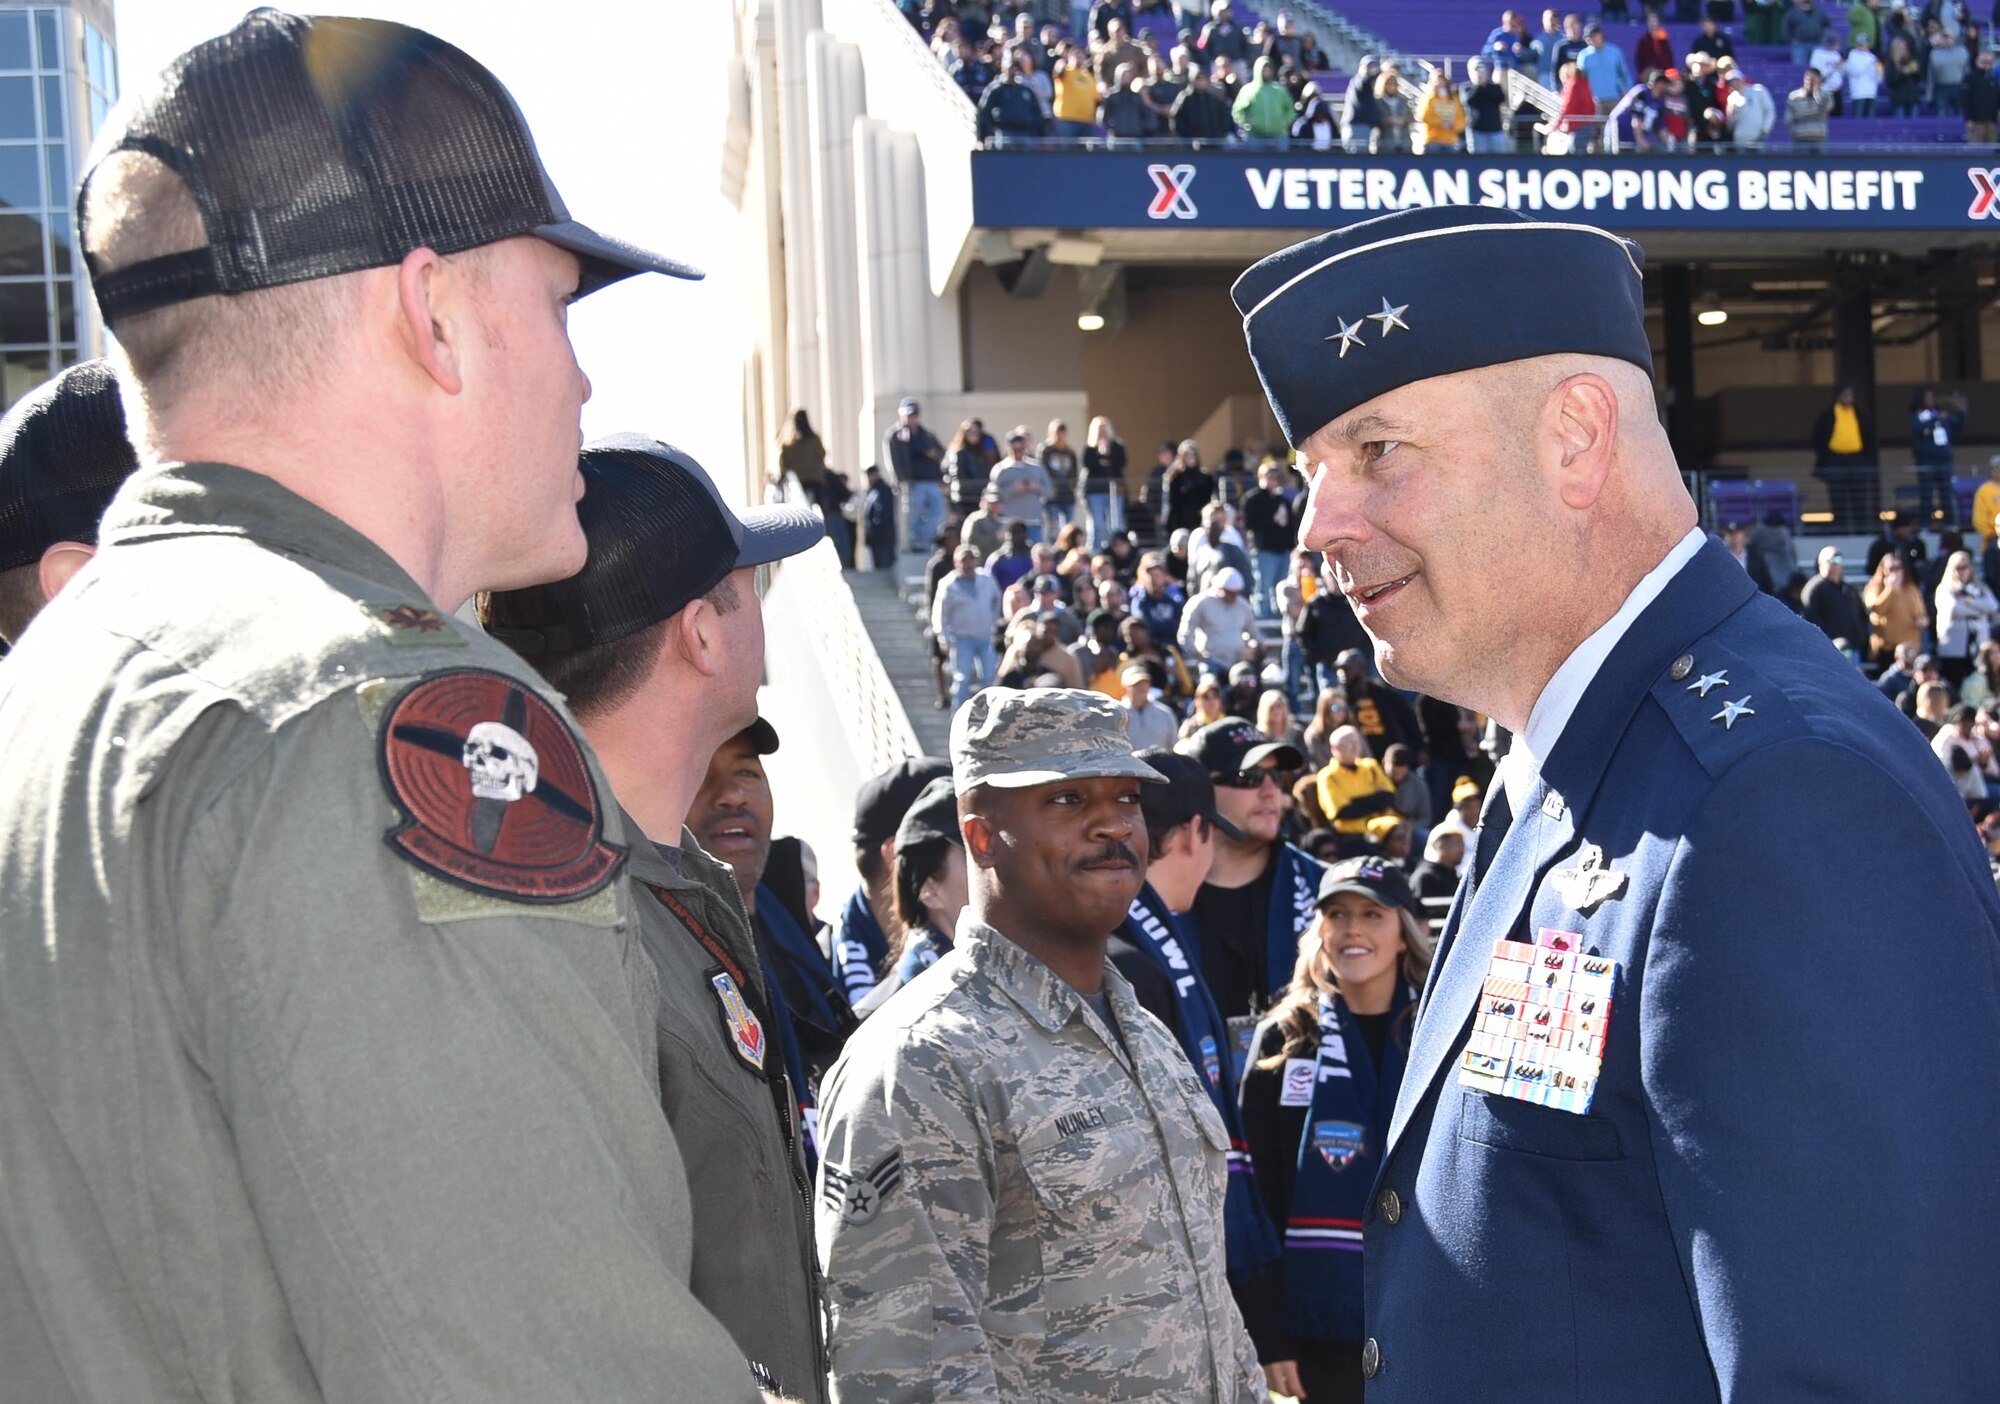 Tenth Air Force Commander Maj. Gen. Brian Borgen speaks with the F-35A Lightning II flight crew from the 6th Weapons Squadron, Nellis Air Force Base, Nevada who performed the flyover during the national anthem at the Lockheed Martin Armed Forces Bowl on January 4, 2020 at Amon G. Carter Stadium in Fort Worth, Texas. Tenth Air Force is headquartered at Naval Air Station Fort Worth Joint Reserve Base, Texas. It is one of three numbered air forces in Air Force Reserve Command, and is responsible for command supervision of 17 units, ensuring each maintains the highest combat capability to augment active duty forces in support of national objectives. (U.S. Air Force photo by Capt. Jessica Gross)